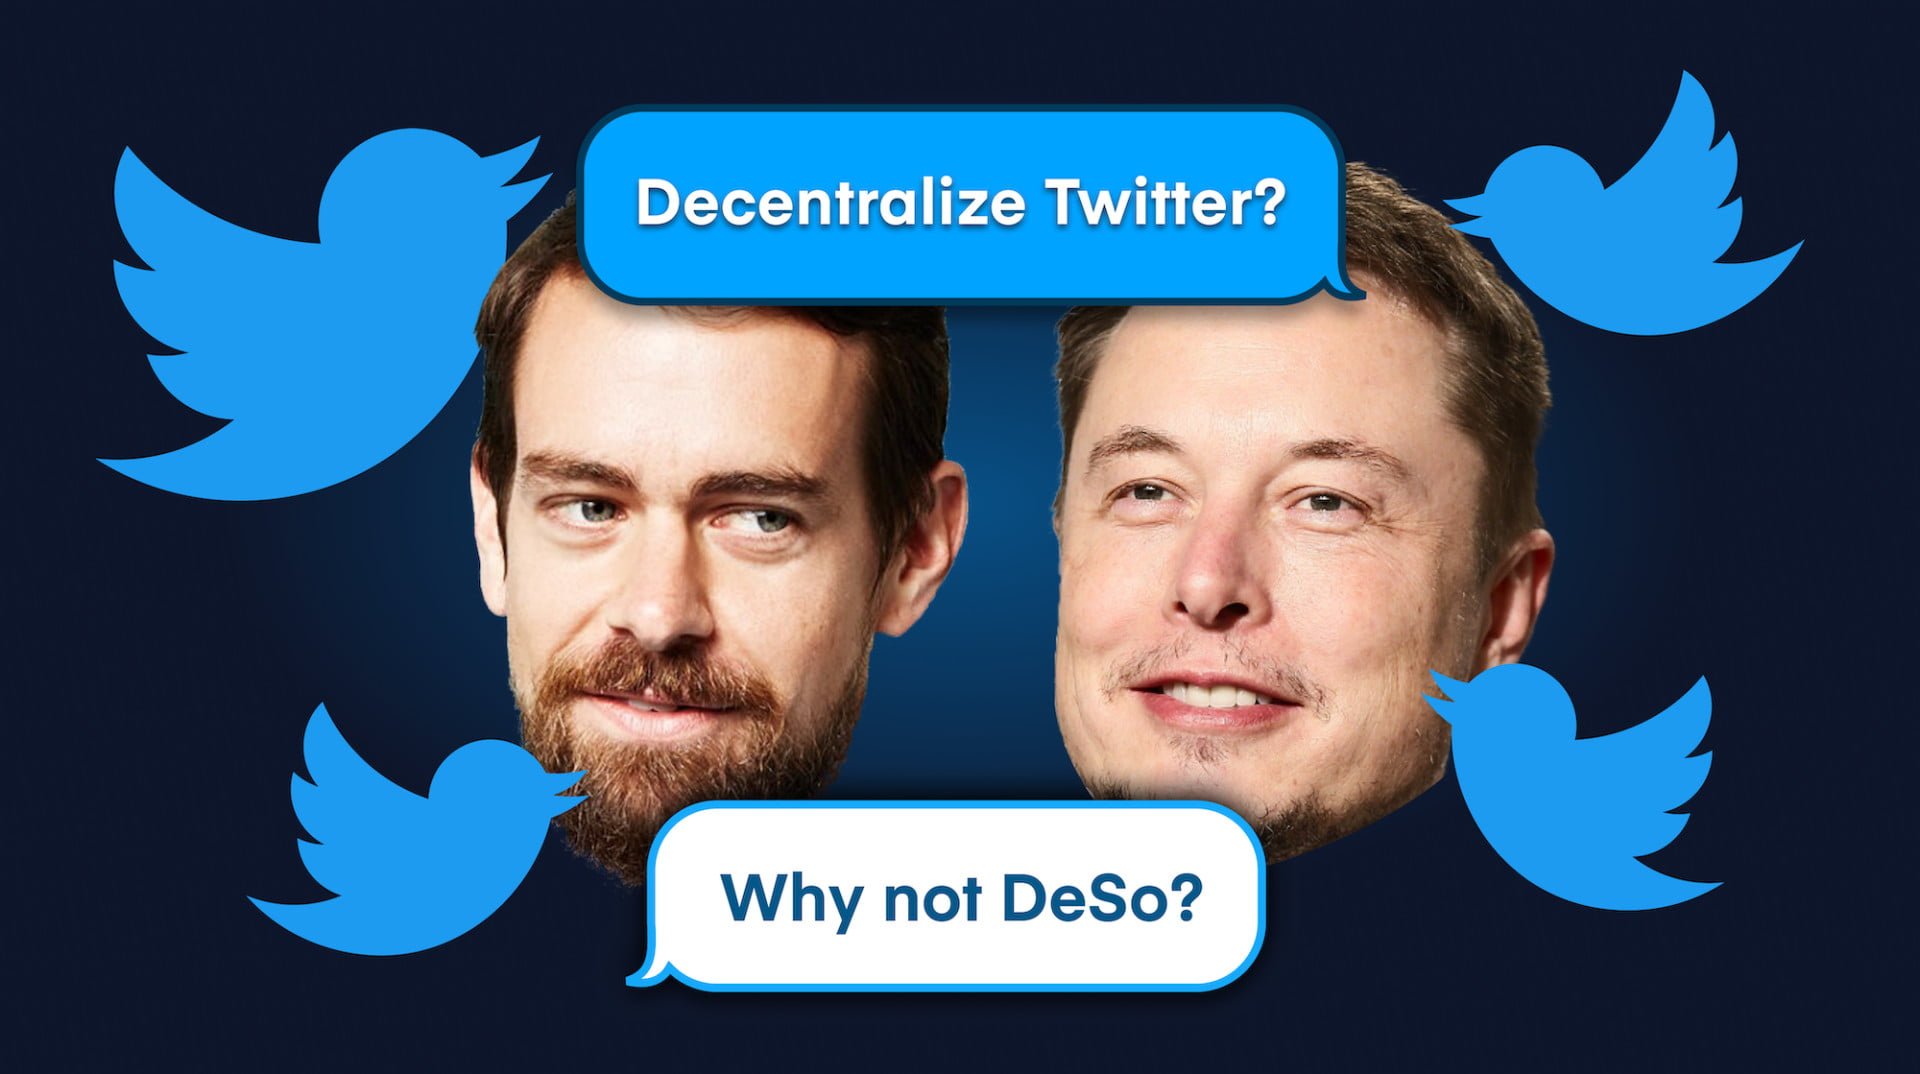 DeSo is Elon Musk and Jack Dorsey’s Answer for Decentralized Social Blockchain 2